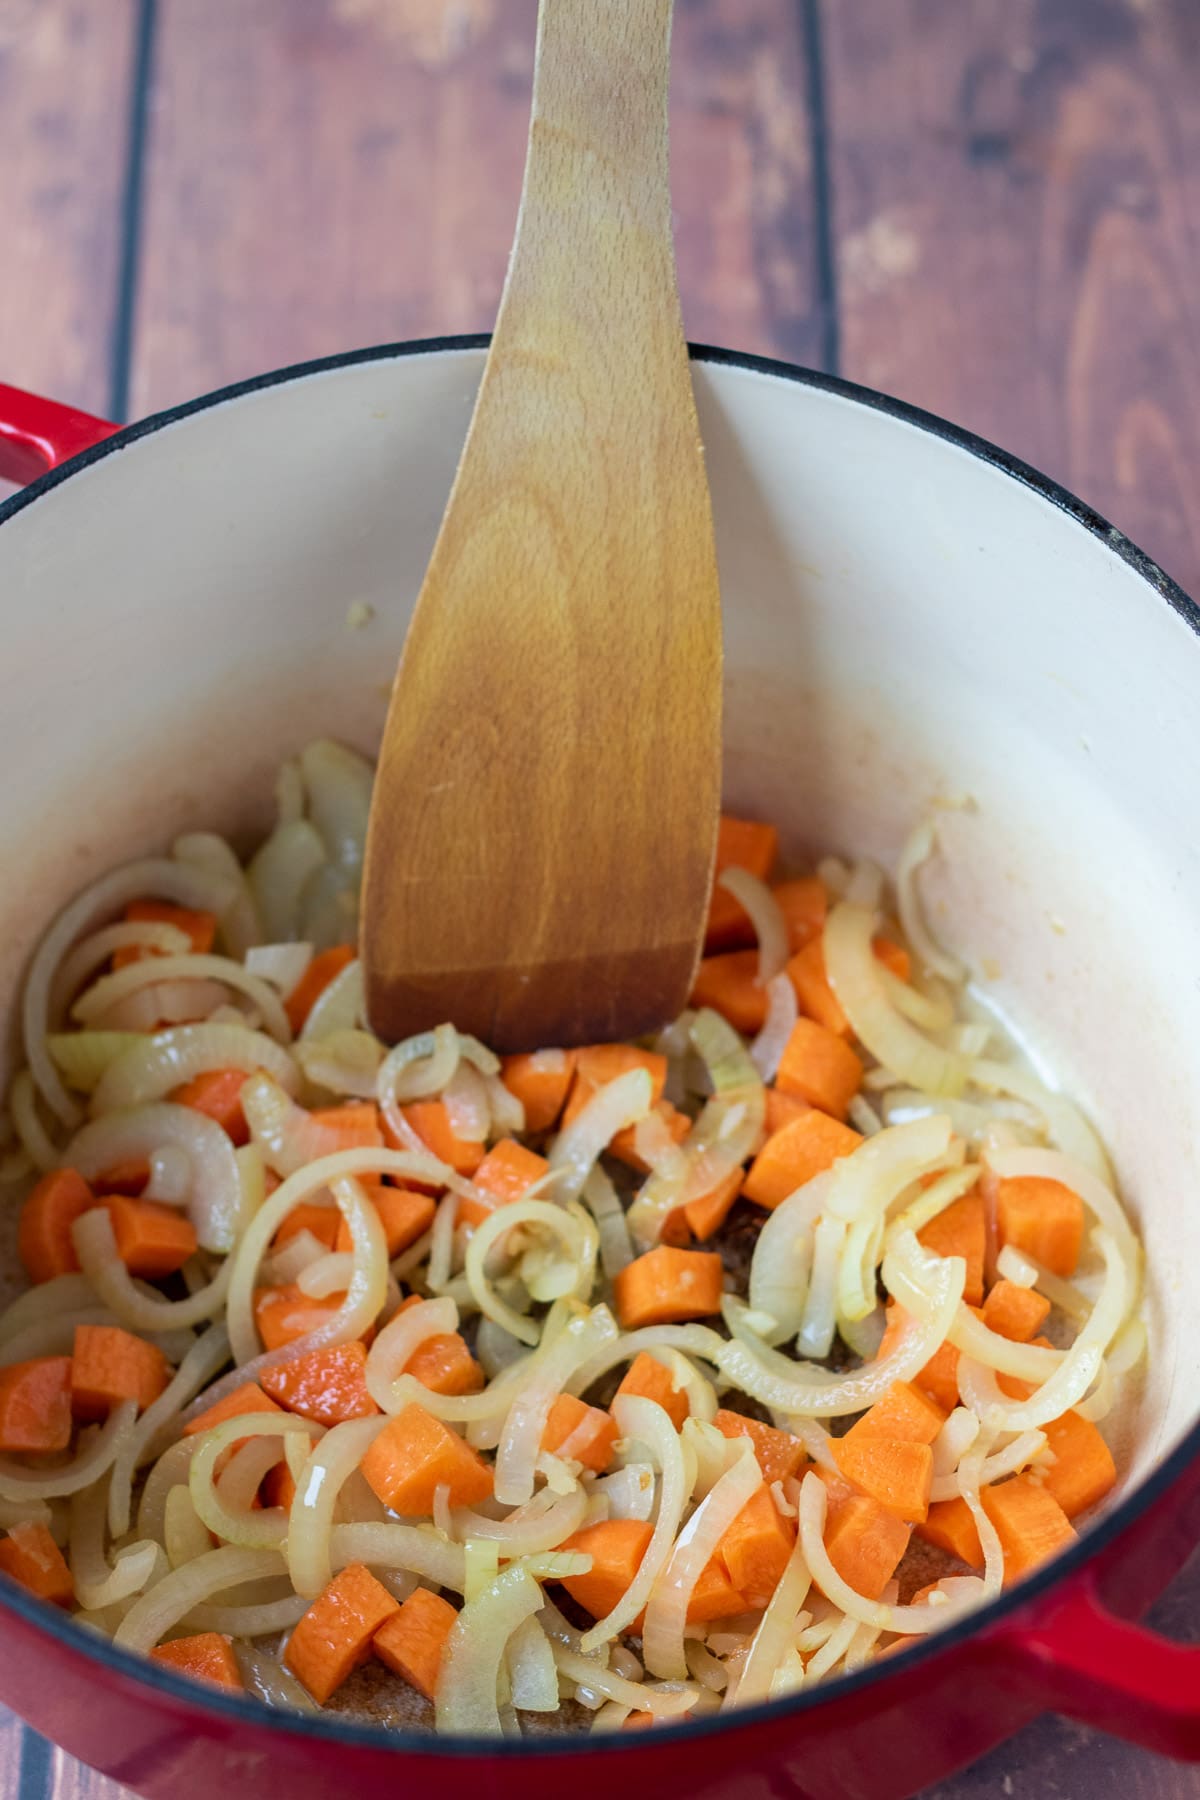 Diced carrot stirred in with the sautéd garlic and onion.